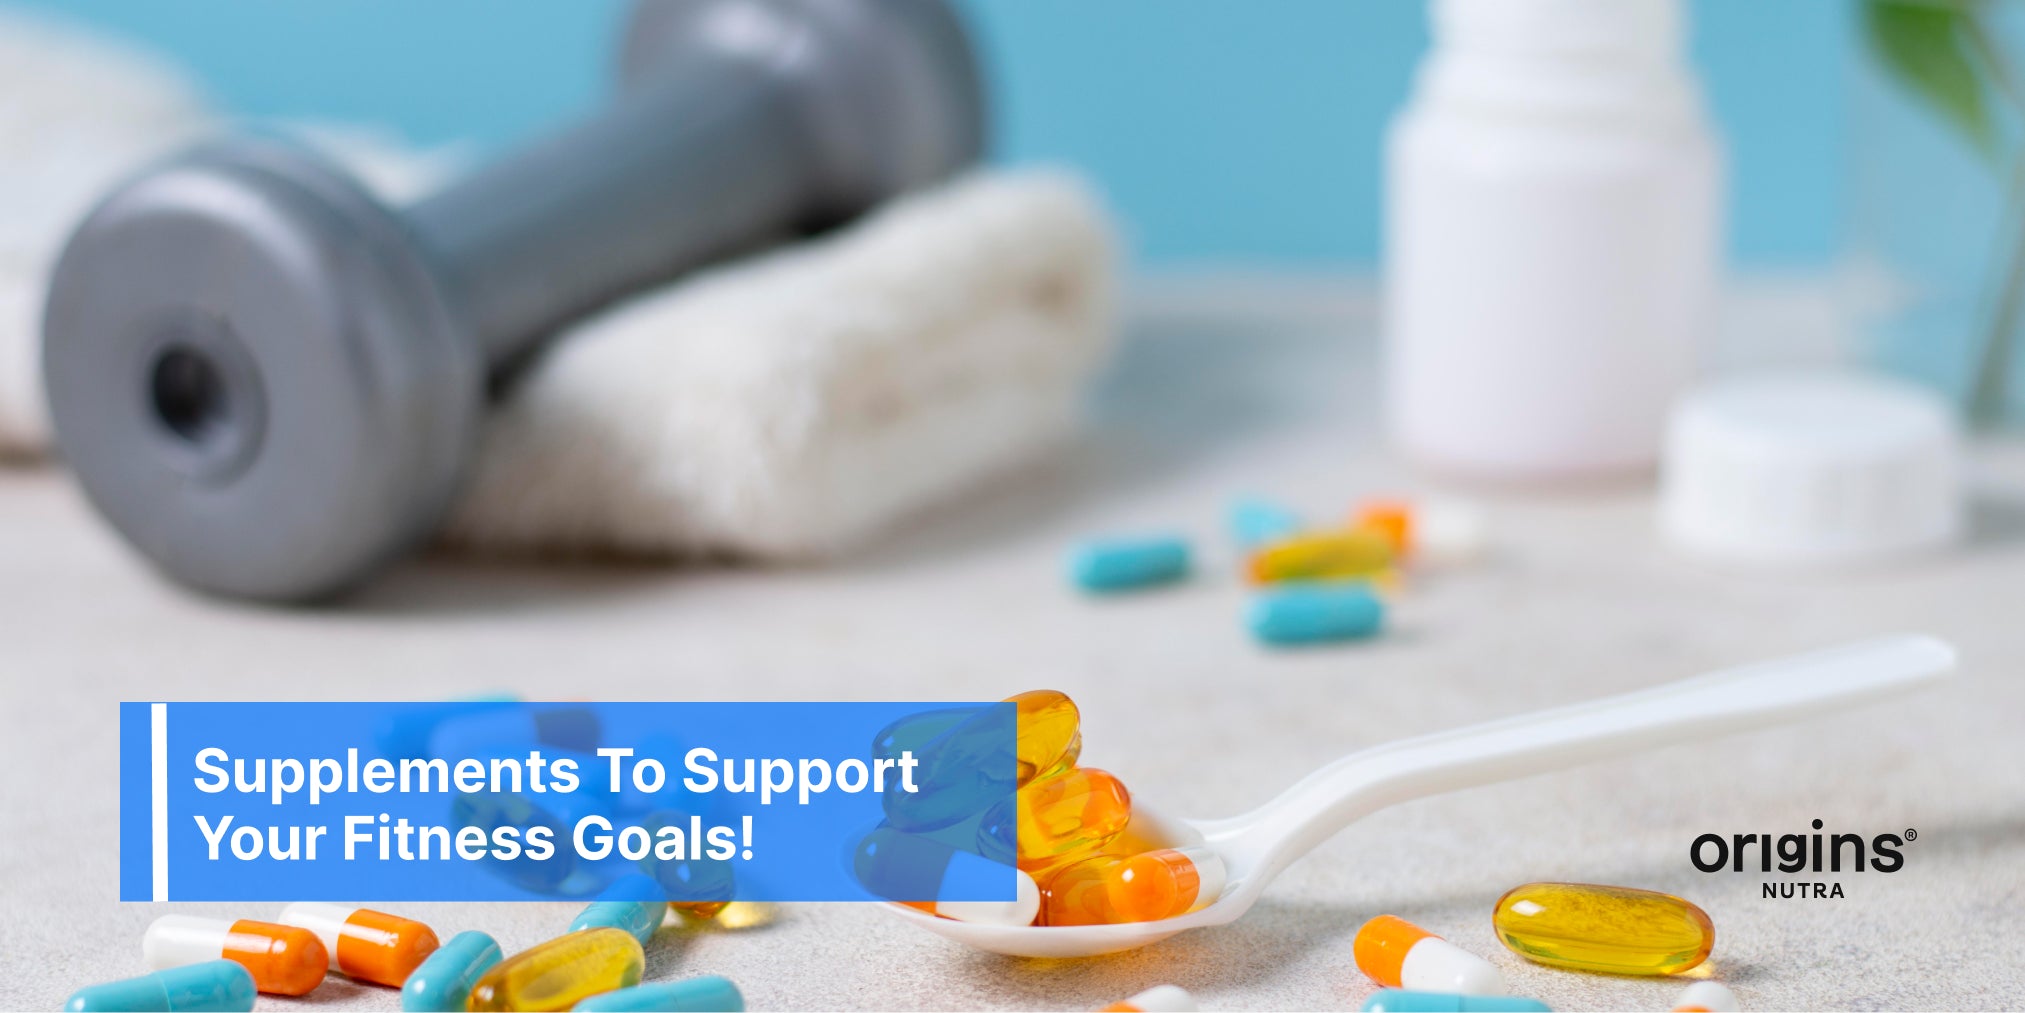 Supplements To Support Your Fitness Goals!